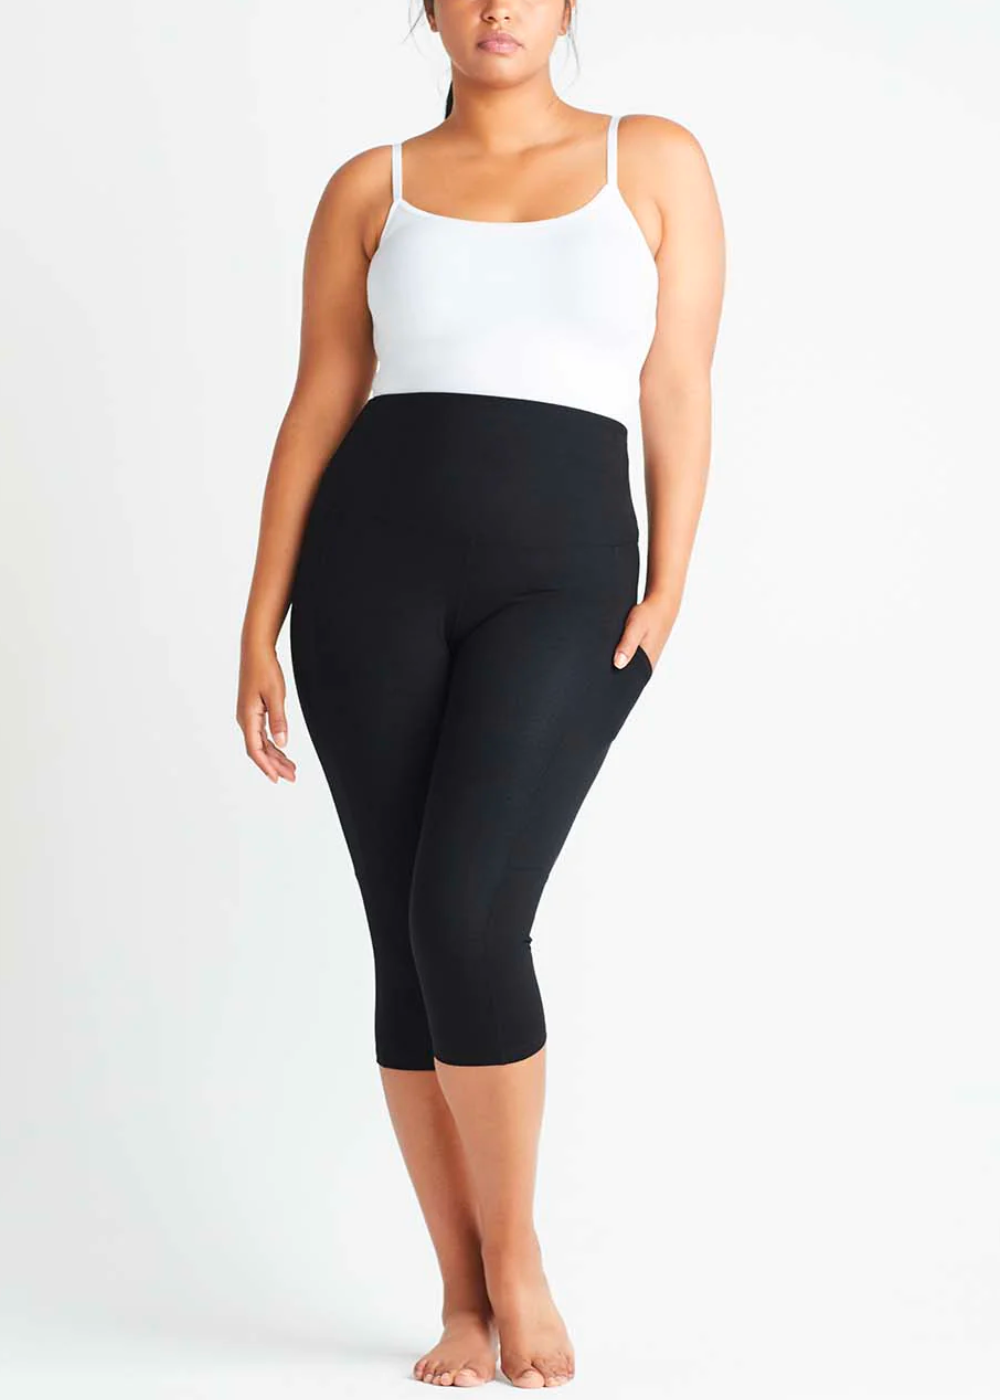 Capri Leggings With Pockets Target Stores  International Society of  Precision Agriculture